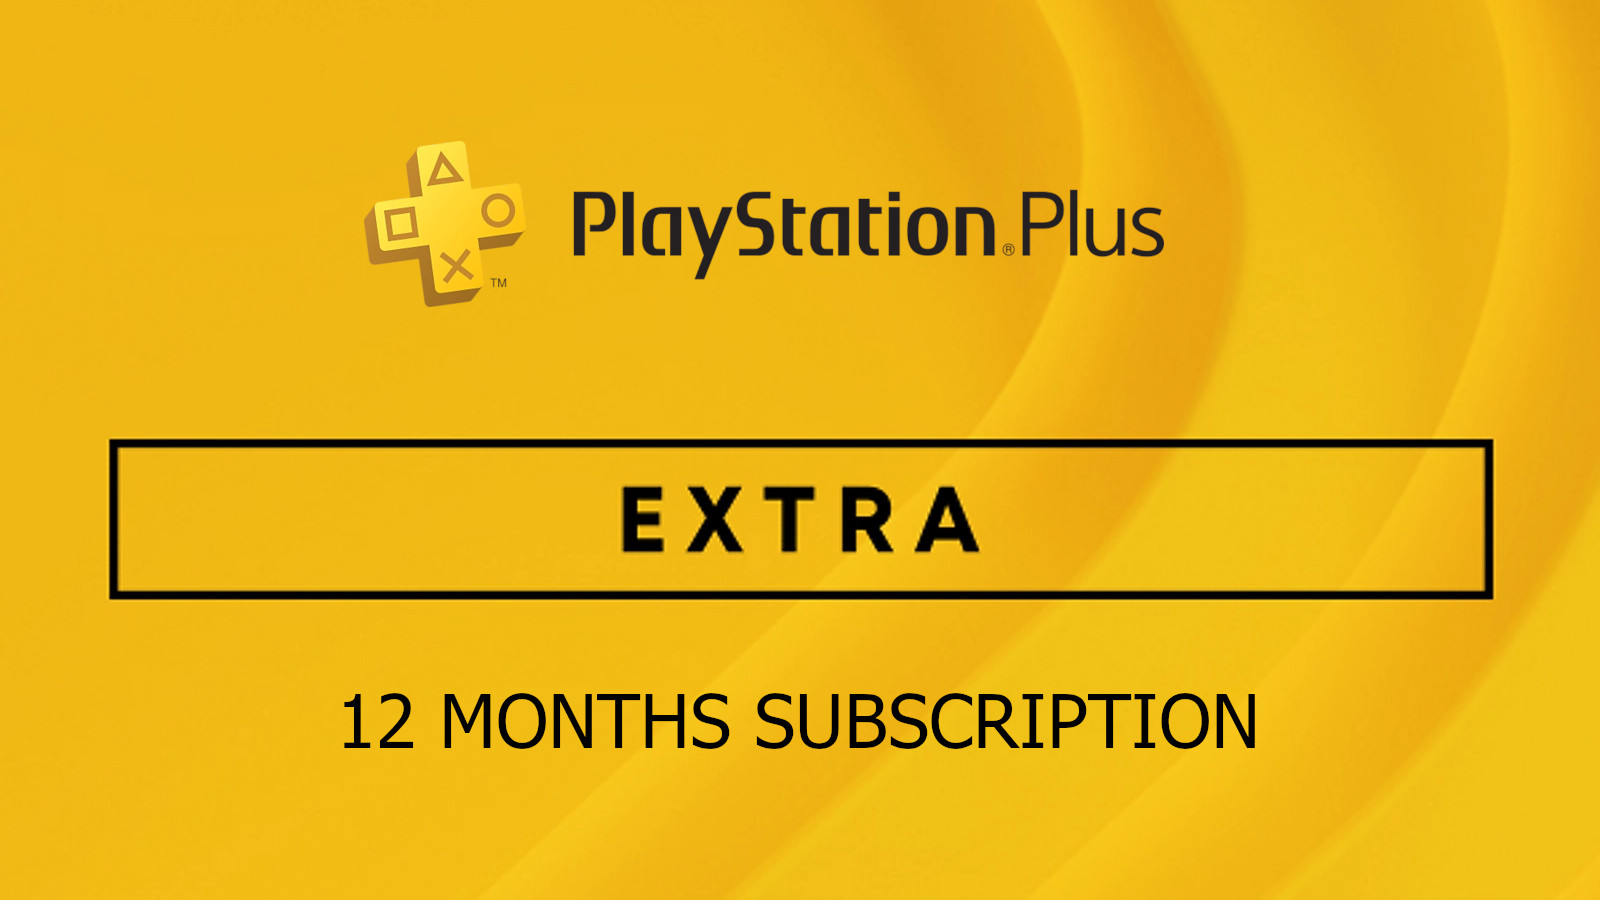 PlayStation Plus Extra 12 Months Subscription ACCOUNT, $94.23